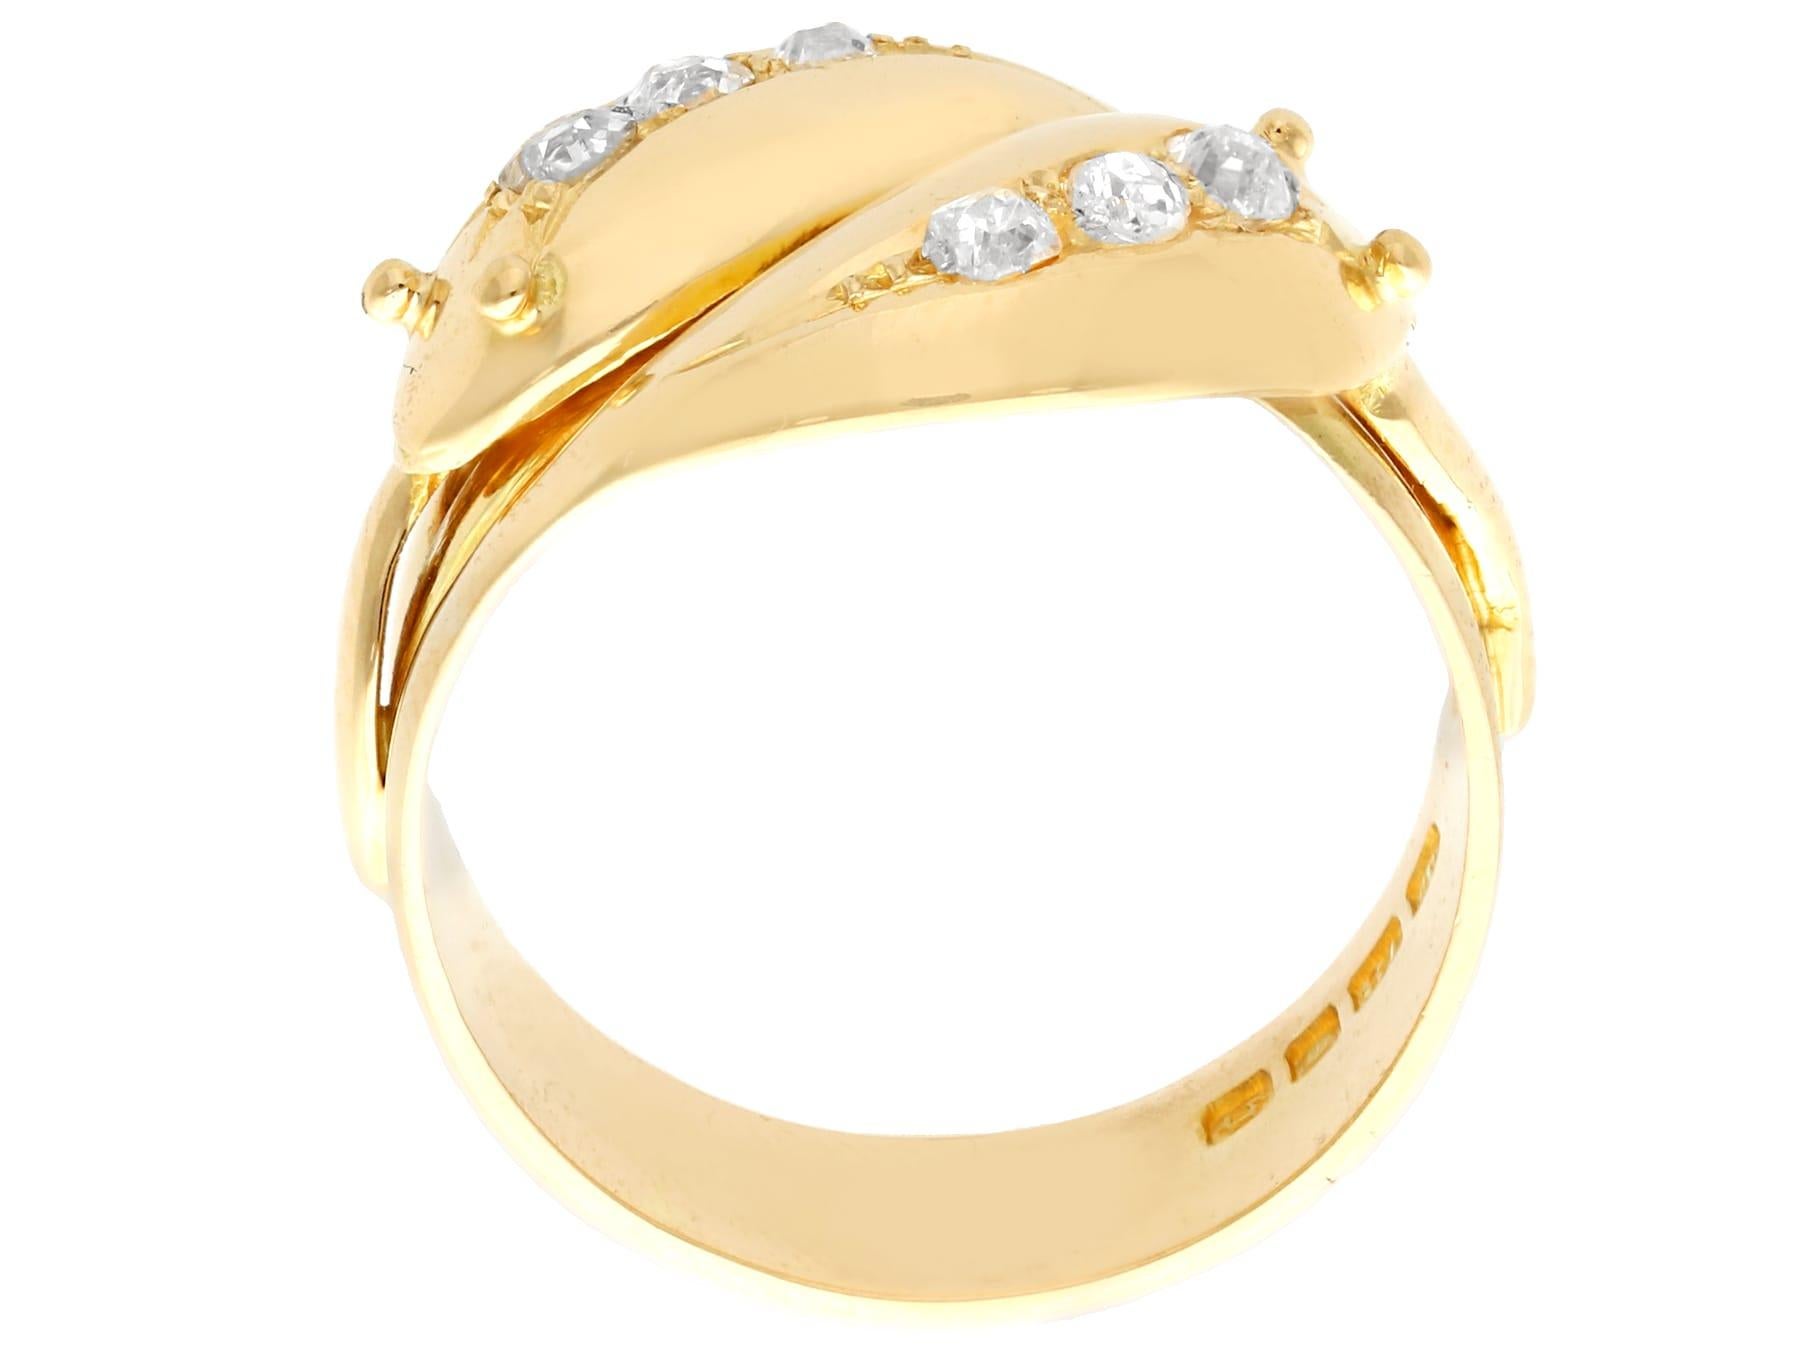 Antique Diamond Yellow Gold Snake Cocktail Ring In Excellent Condition For Sale In Jesmond, Newcastle Upon Tyne